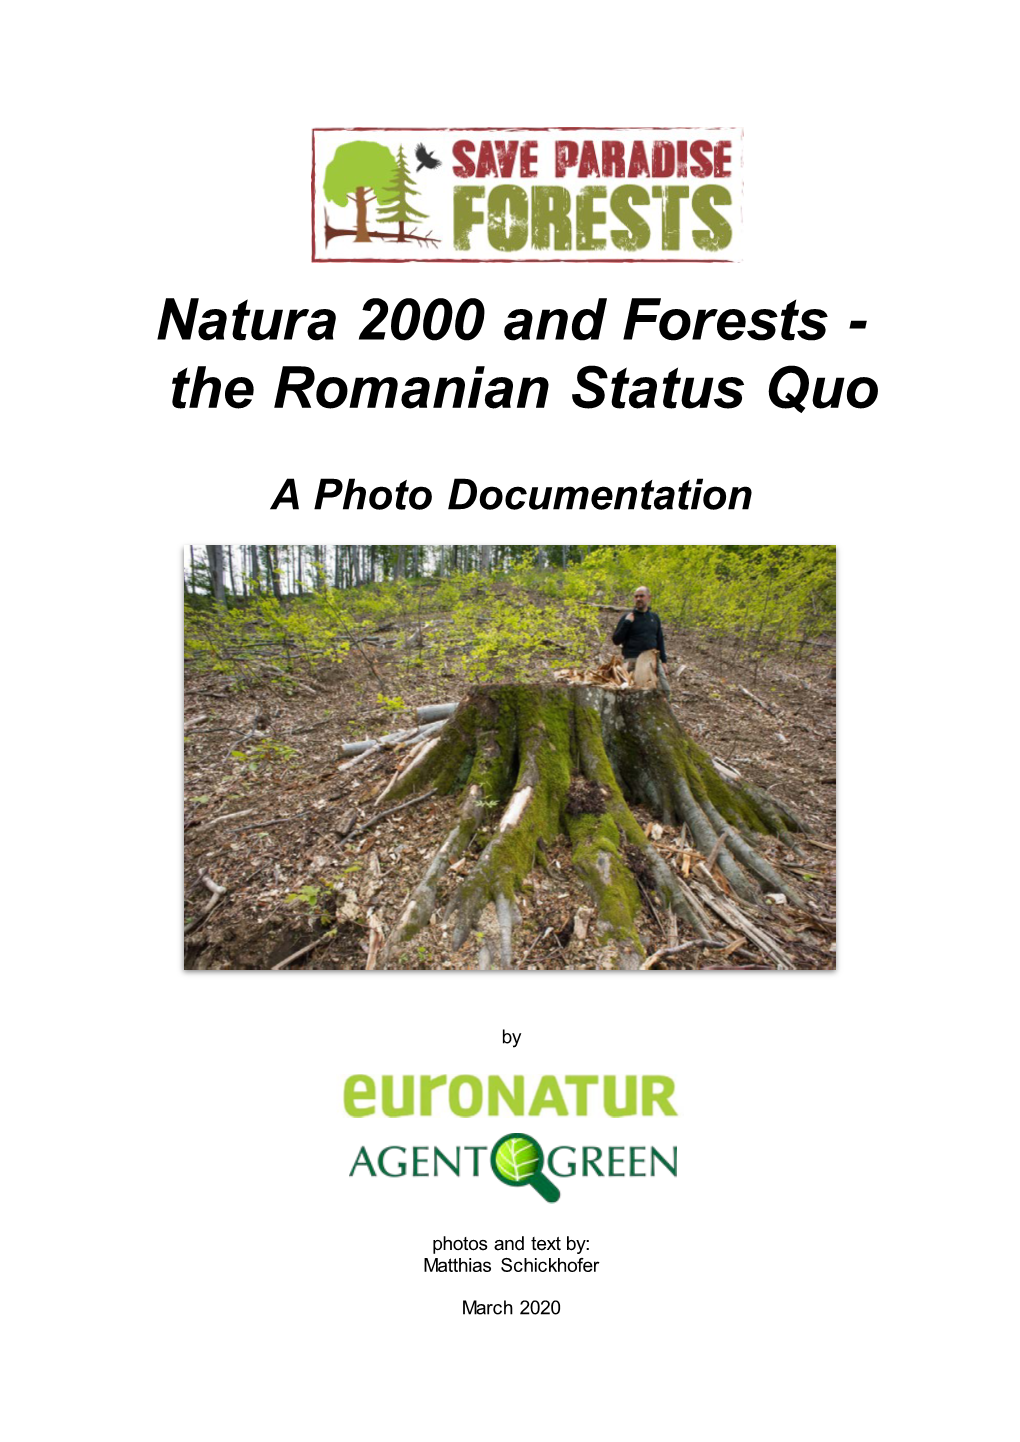 Natura 2000 and Forests - the Romanian Status Quo